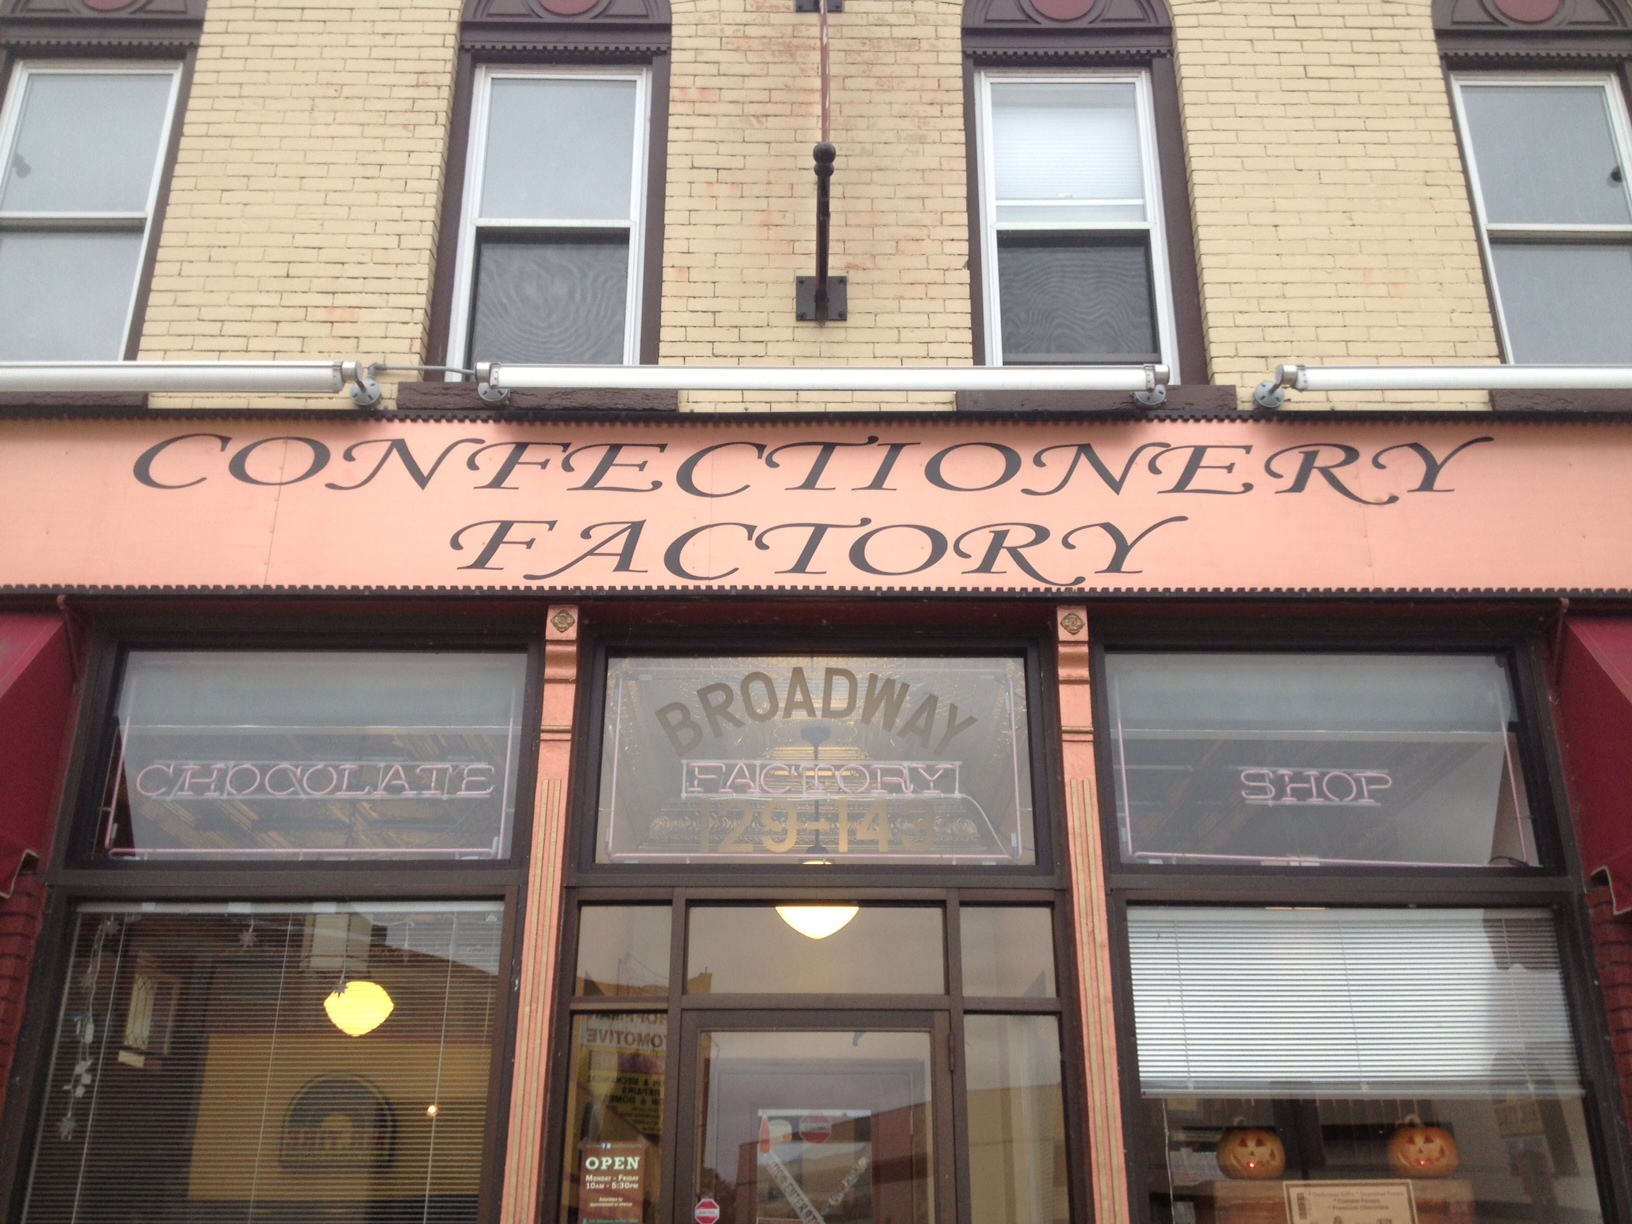 The first chocolate shop and factory that I visited in Buffalo, NY